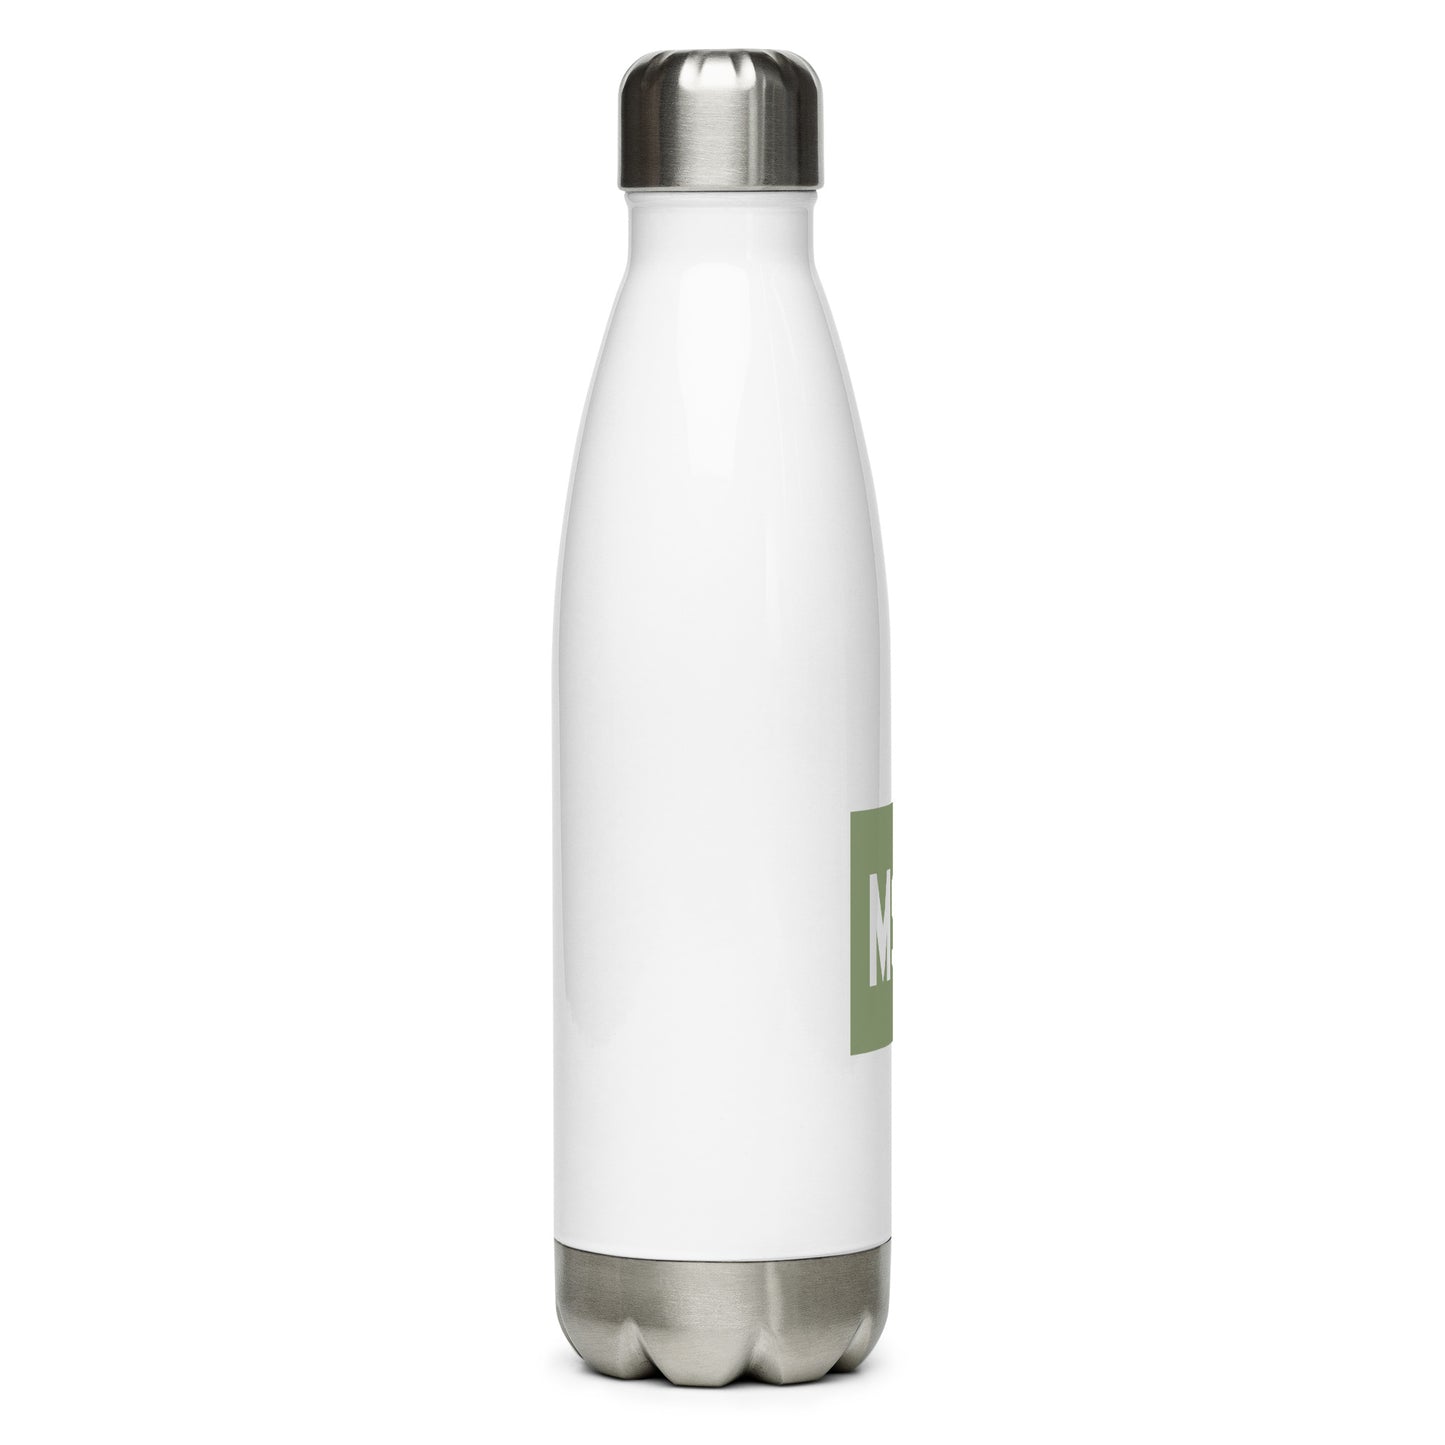 Aviation Gift Water Bottle - Camo Green • MSY New Orleans • YHM Designs - Image 07